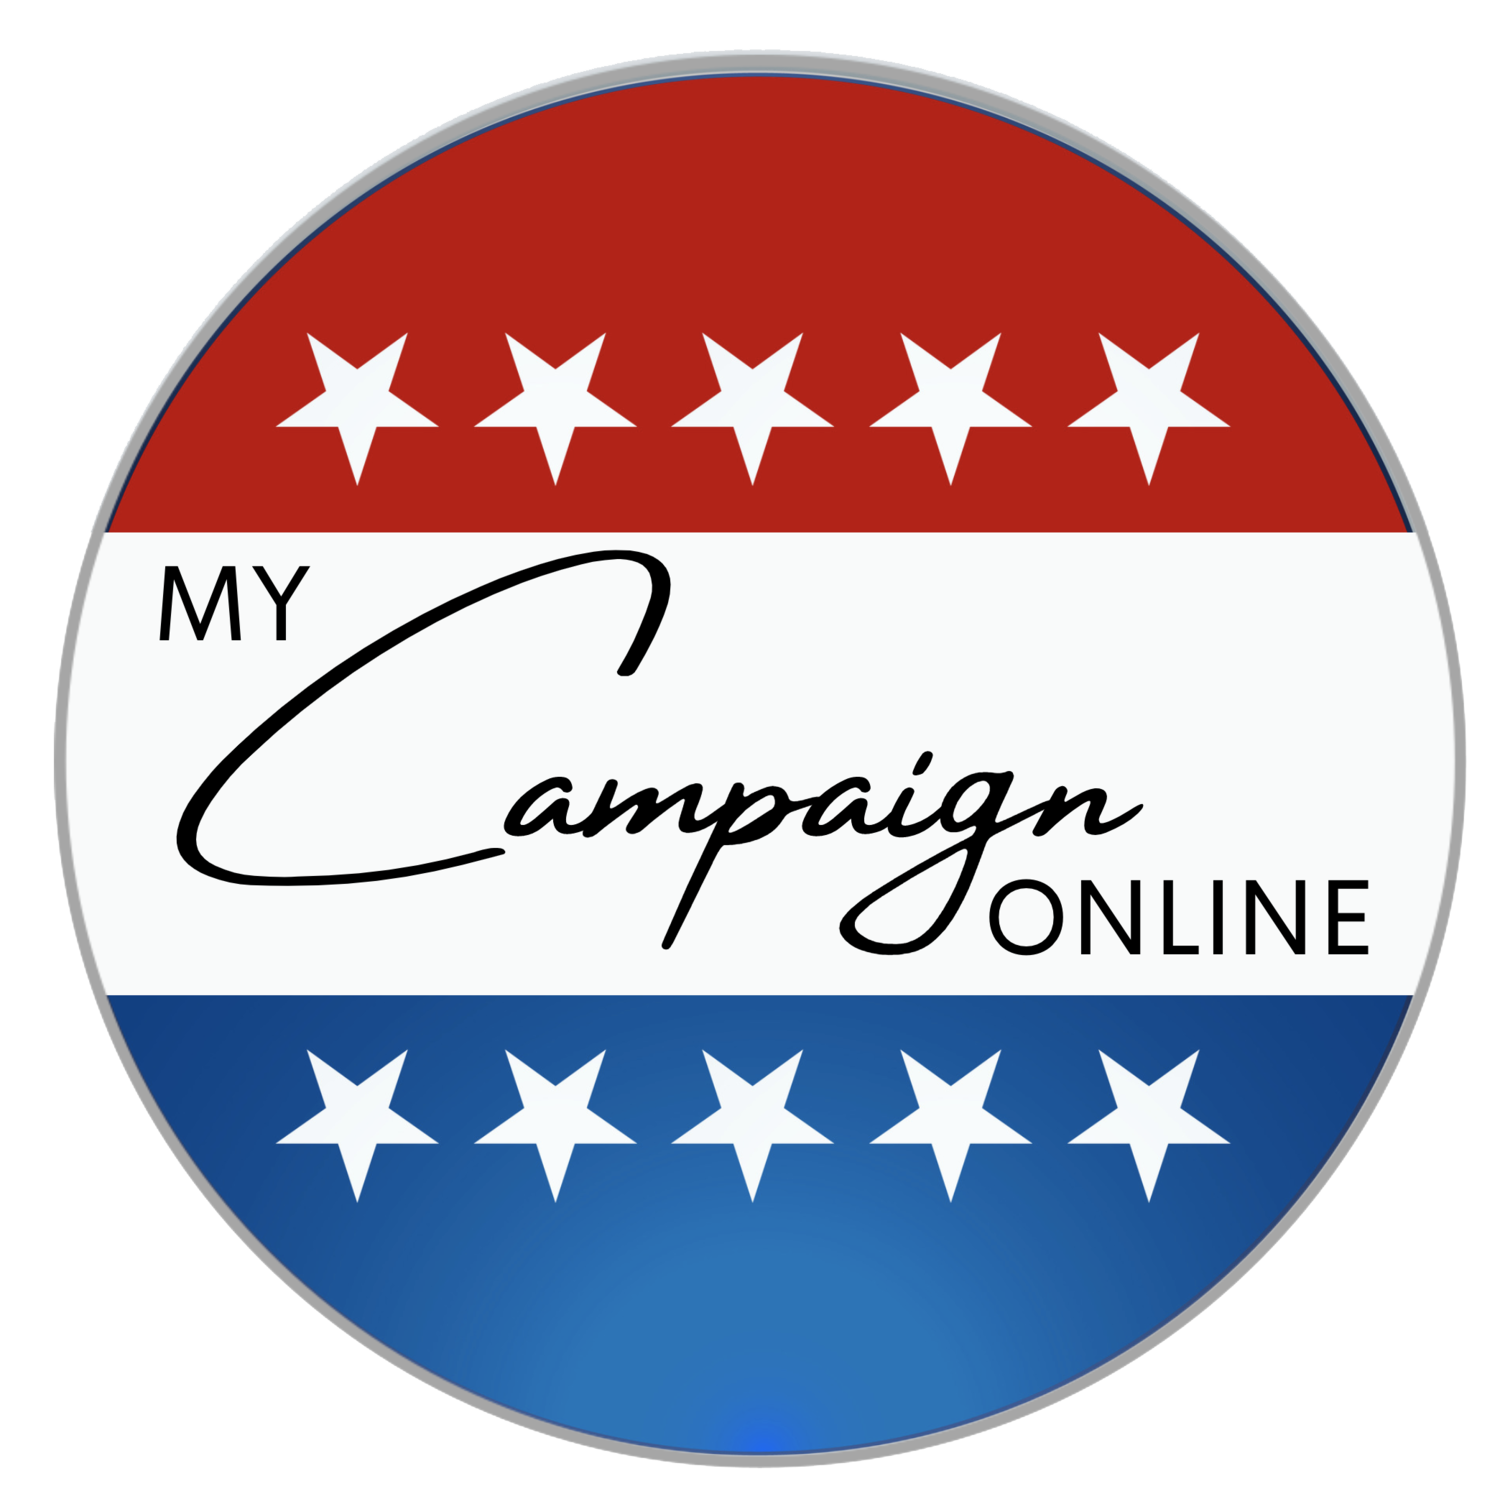 My Campaign Online